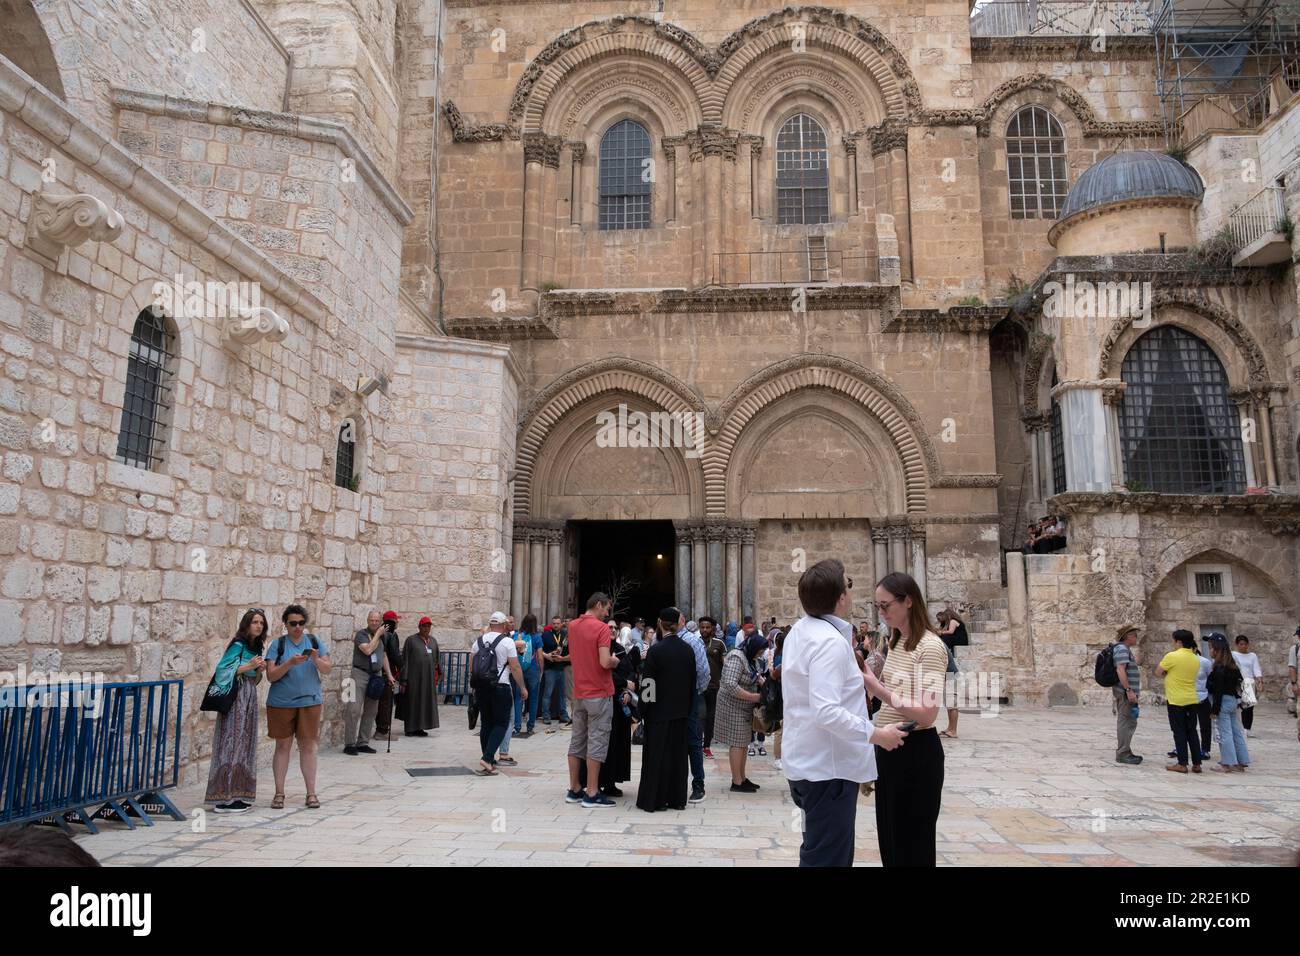 Church of Holy Sepulchre in Jerusalem, Israel. Stock Photo